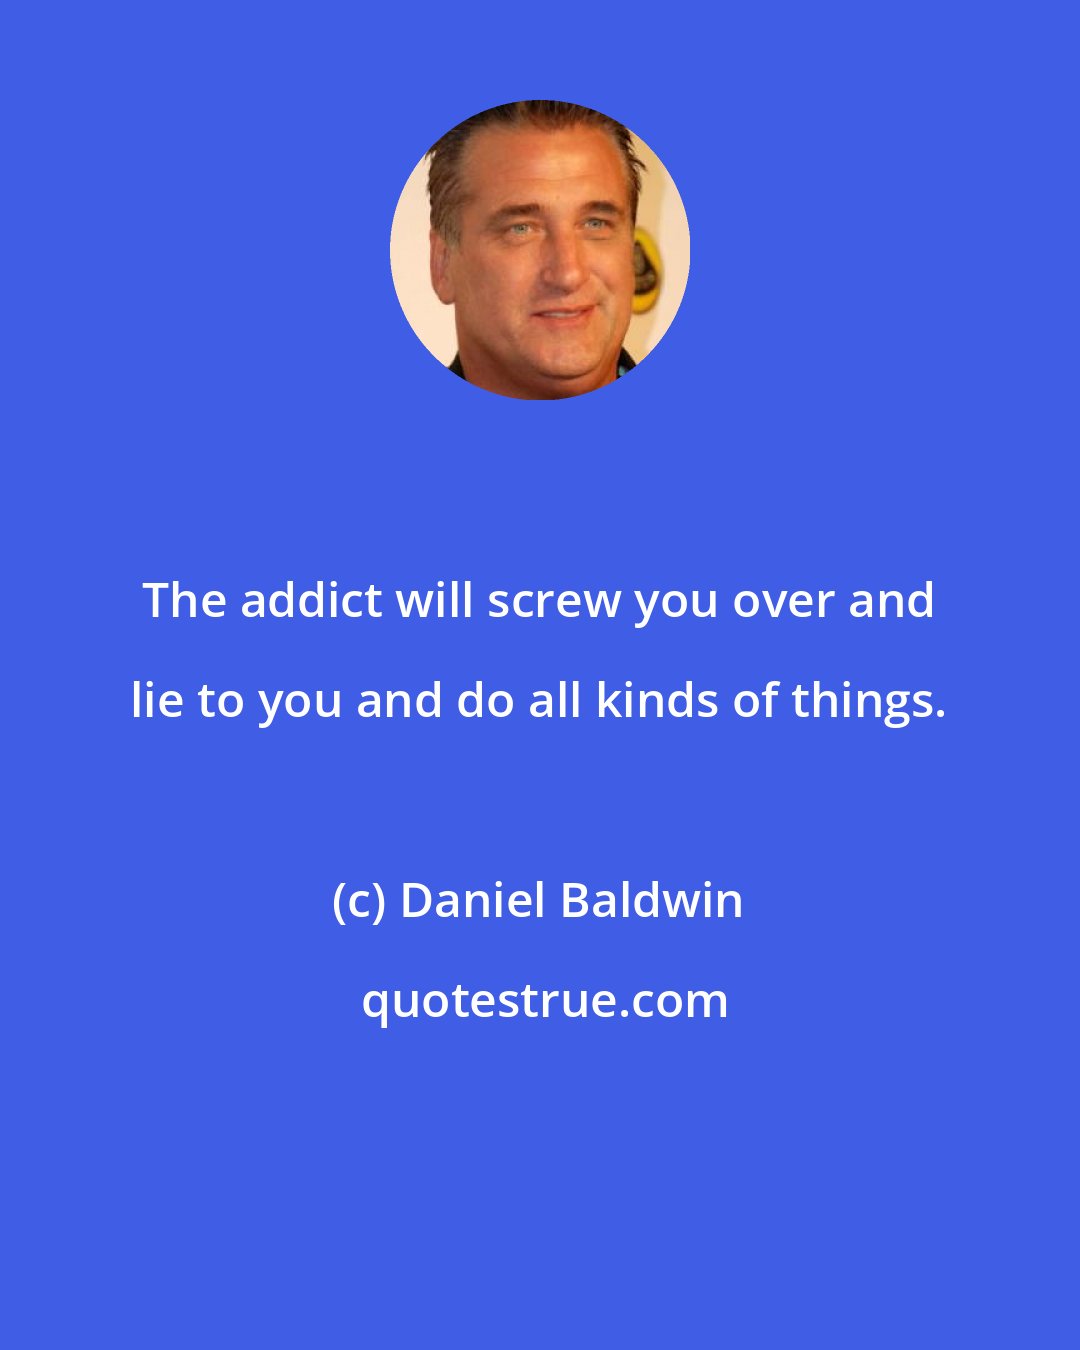 Daniel Baldwin: The addict will screw you over and lie to you and do all kinds of things.